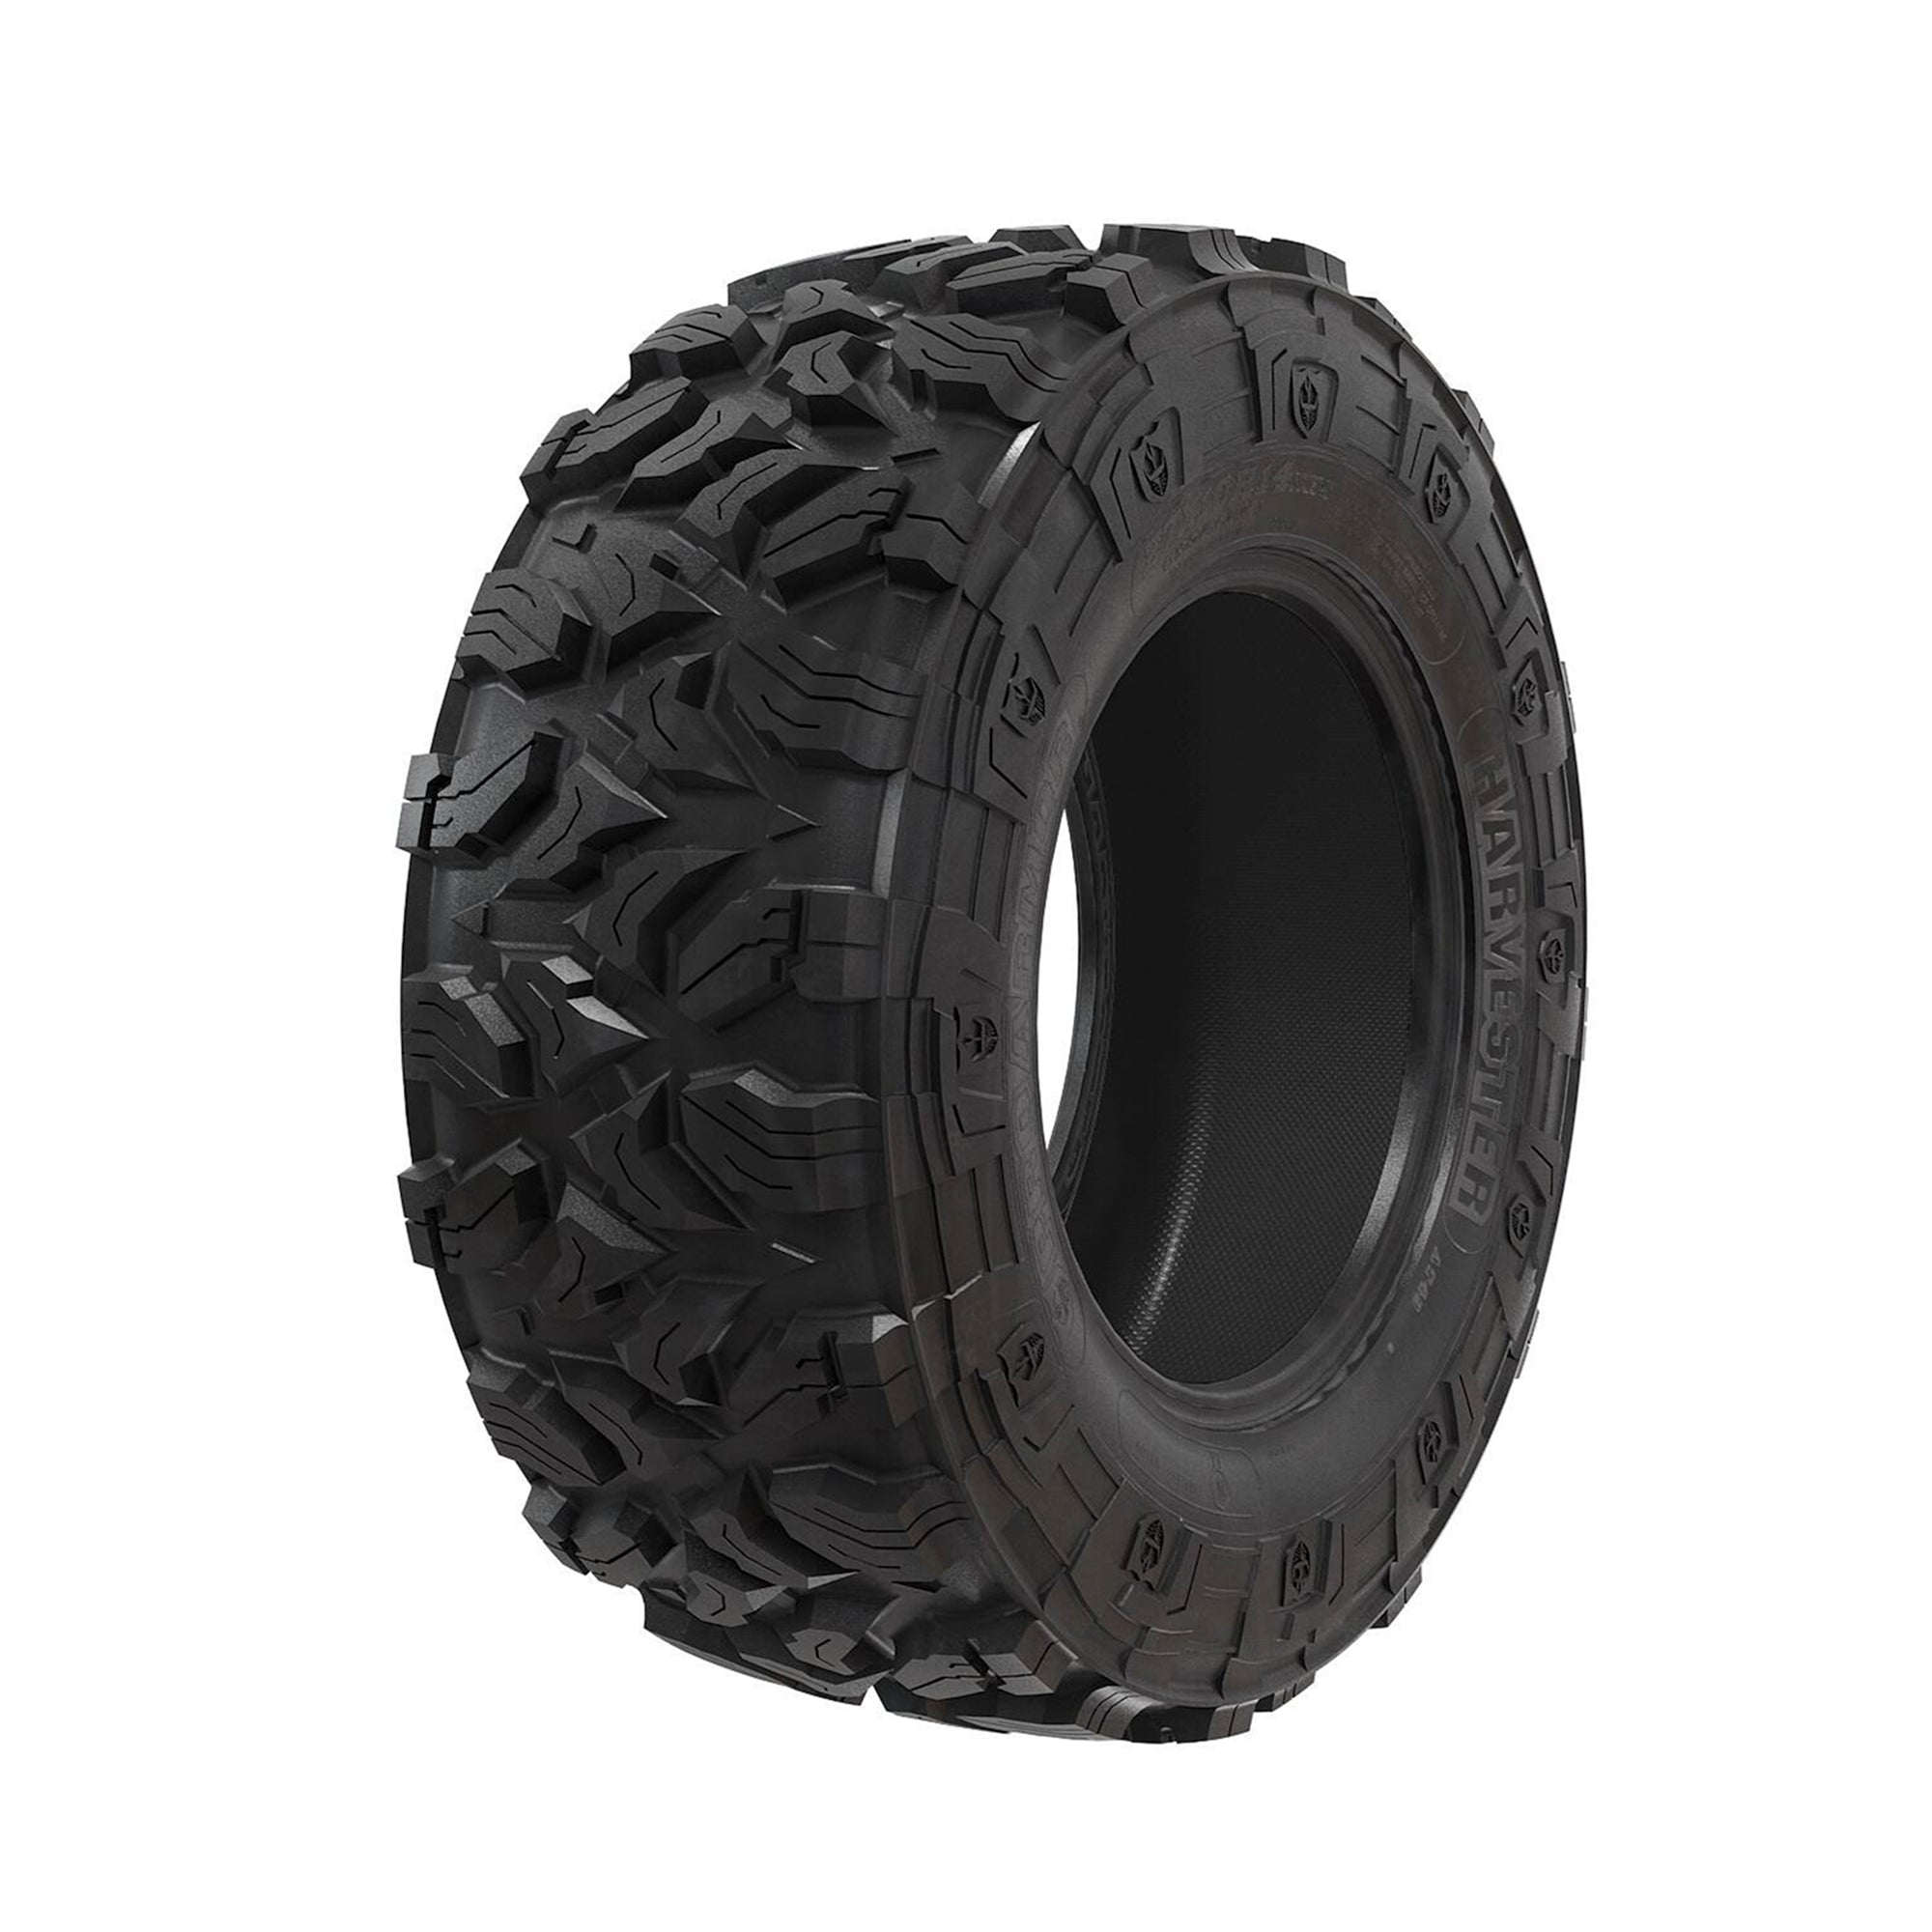 Pro Armor 5415965 Front / Rear Tire